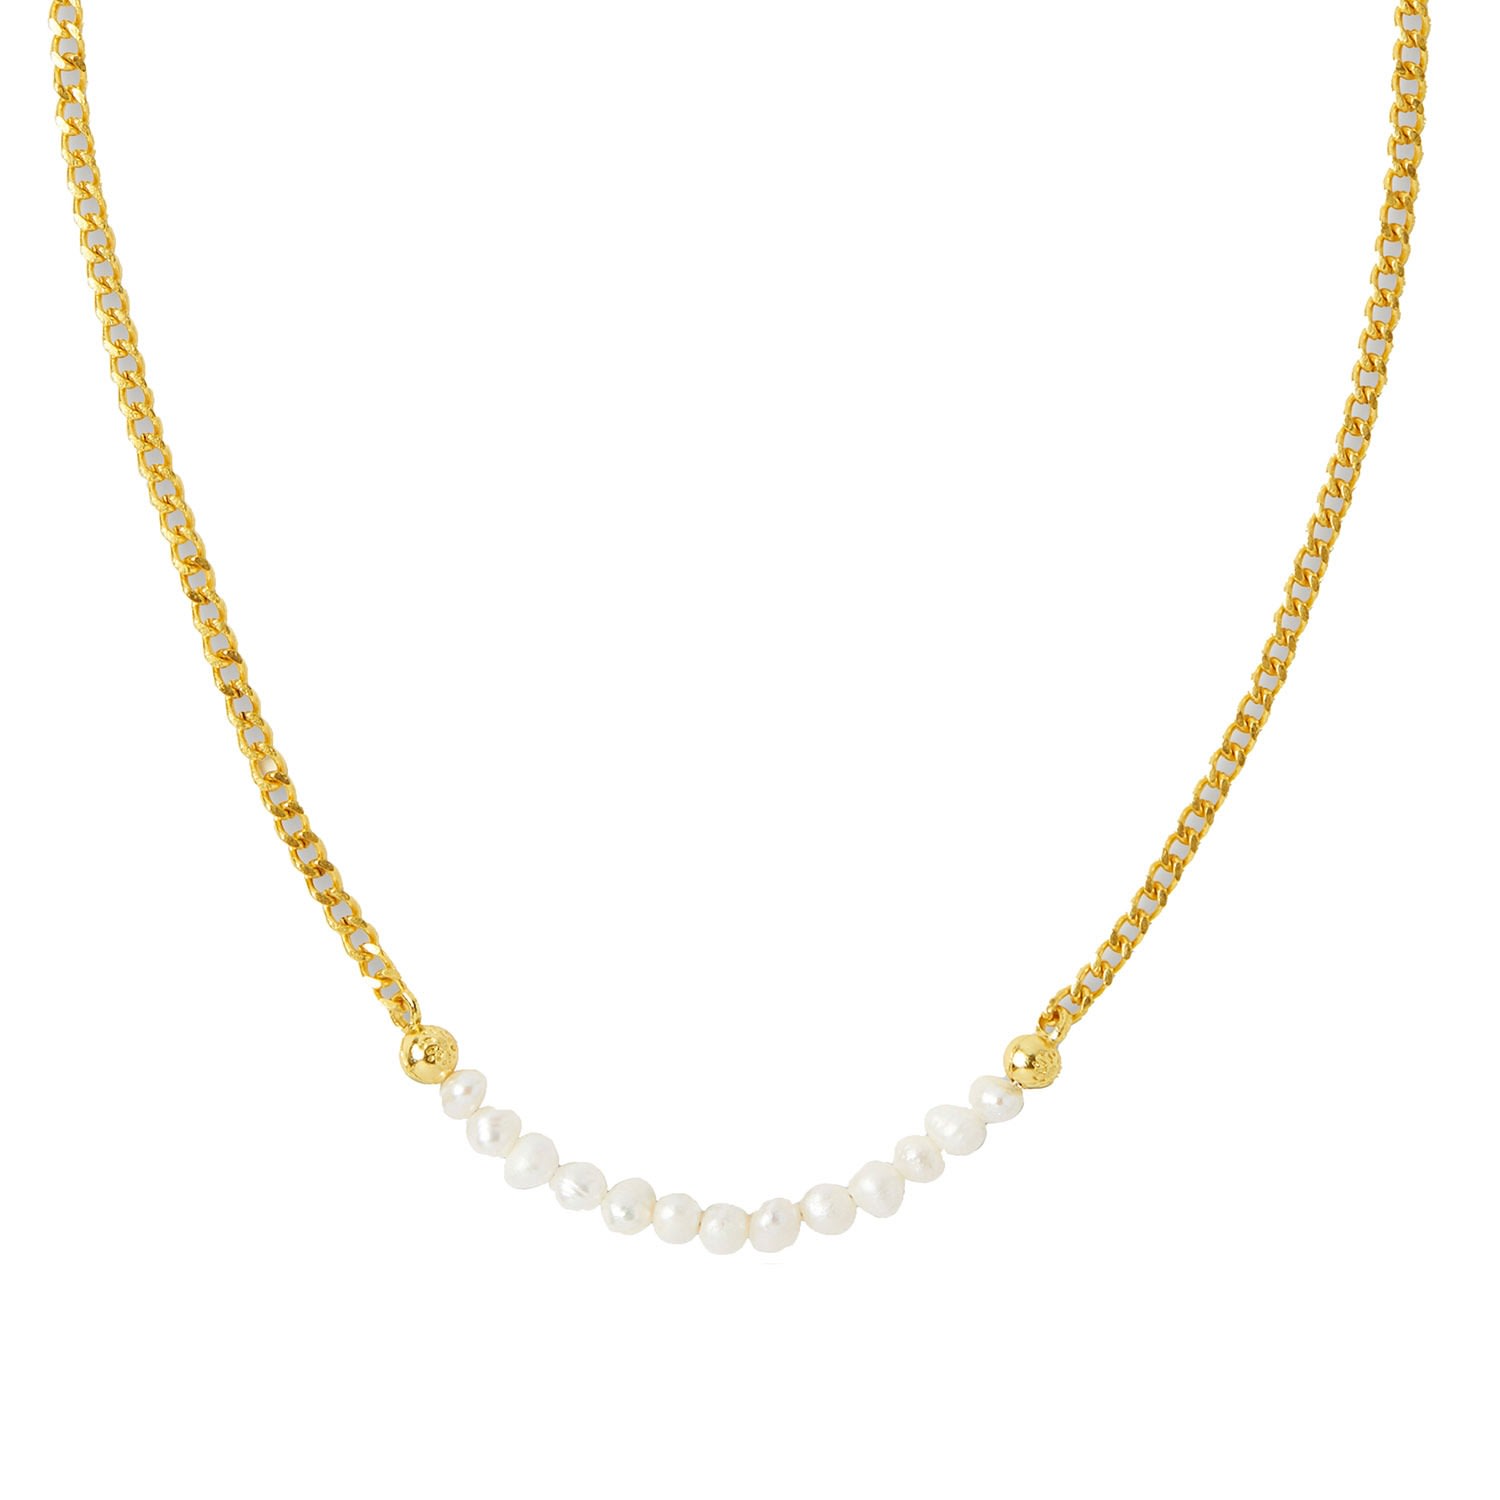 Women's Gold / White Margot Pearl Beaded Chain Necklace Ottoman Hands